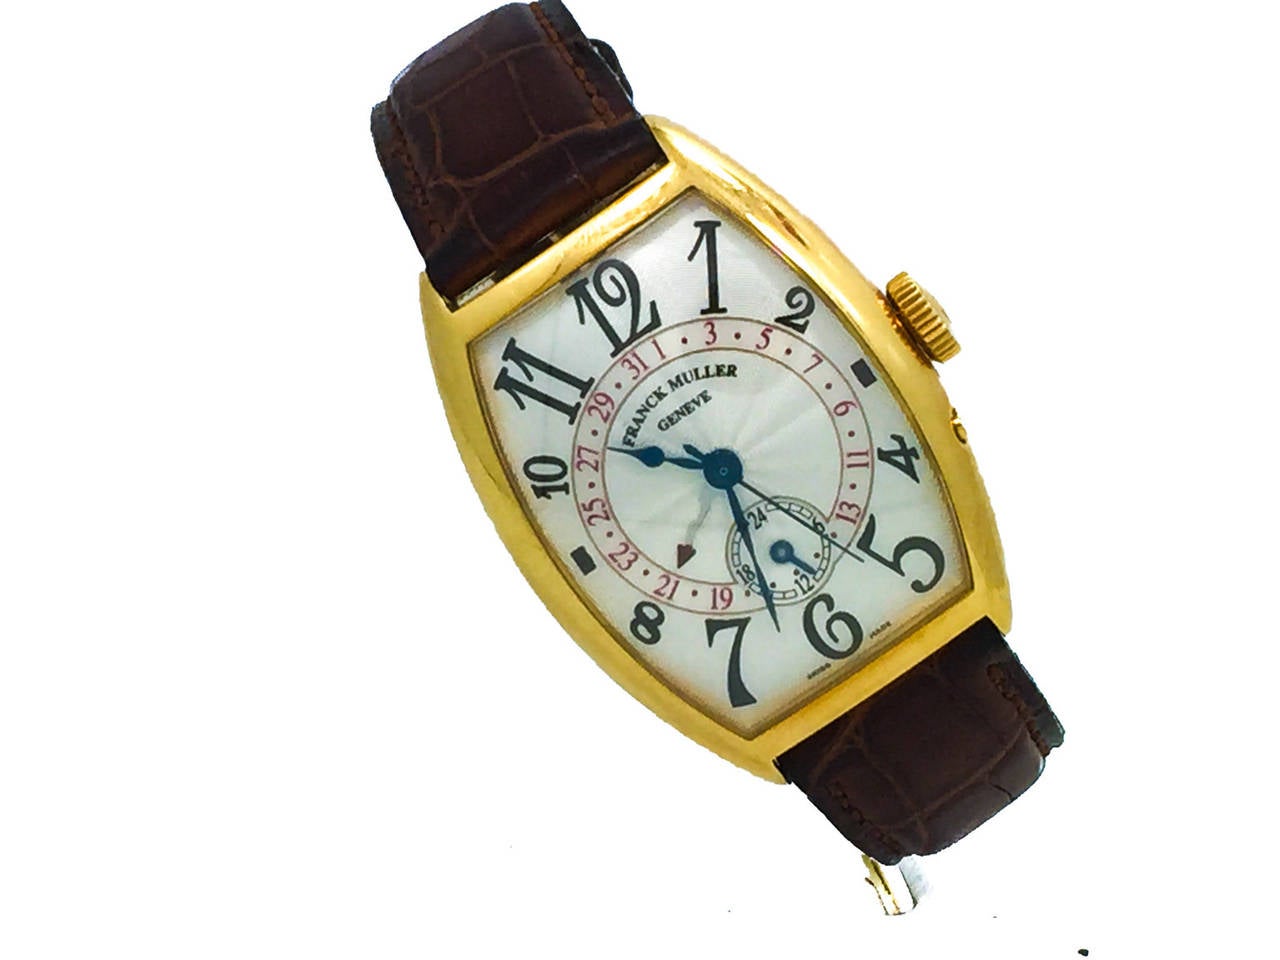 Mens Franck Muller Master Calendar 18k Yellow Gold Watch, Ref 5850 Q. The Watch is in Great Condition W/ Some Normal Signs of Wear, With a Polish it will Look Brand New. The Watch is Functioning Excellently, it is Powered by Automatic Mechanical